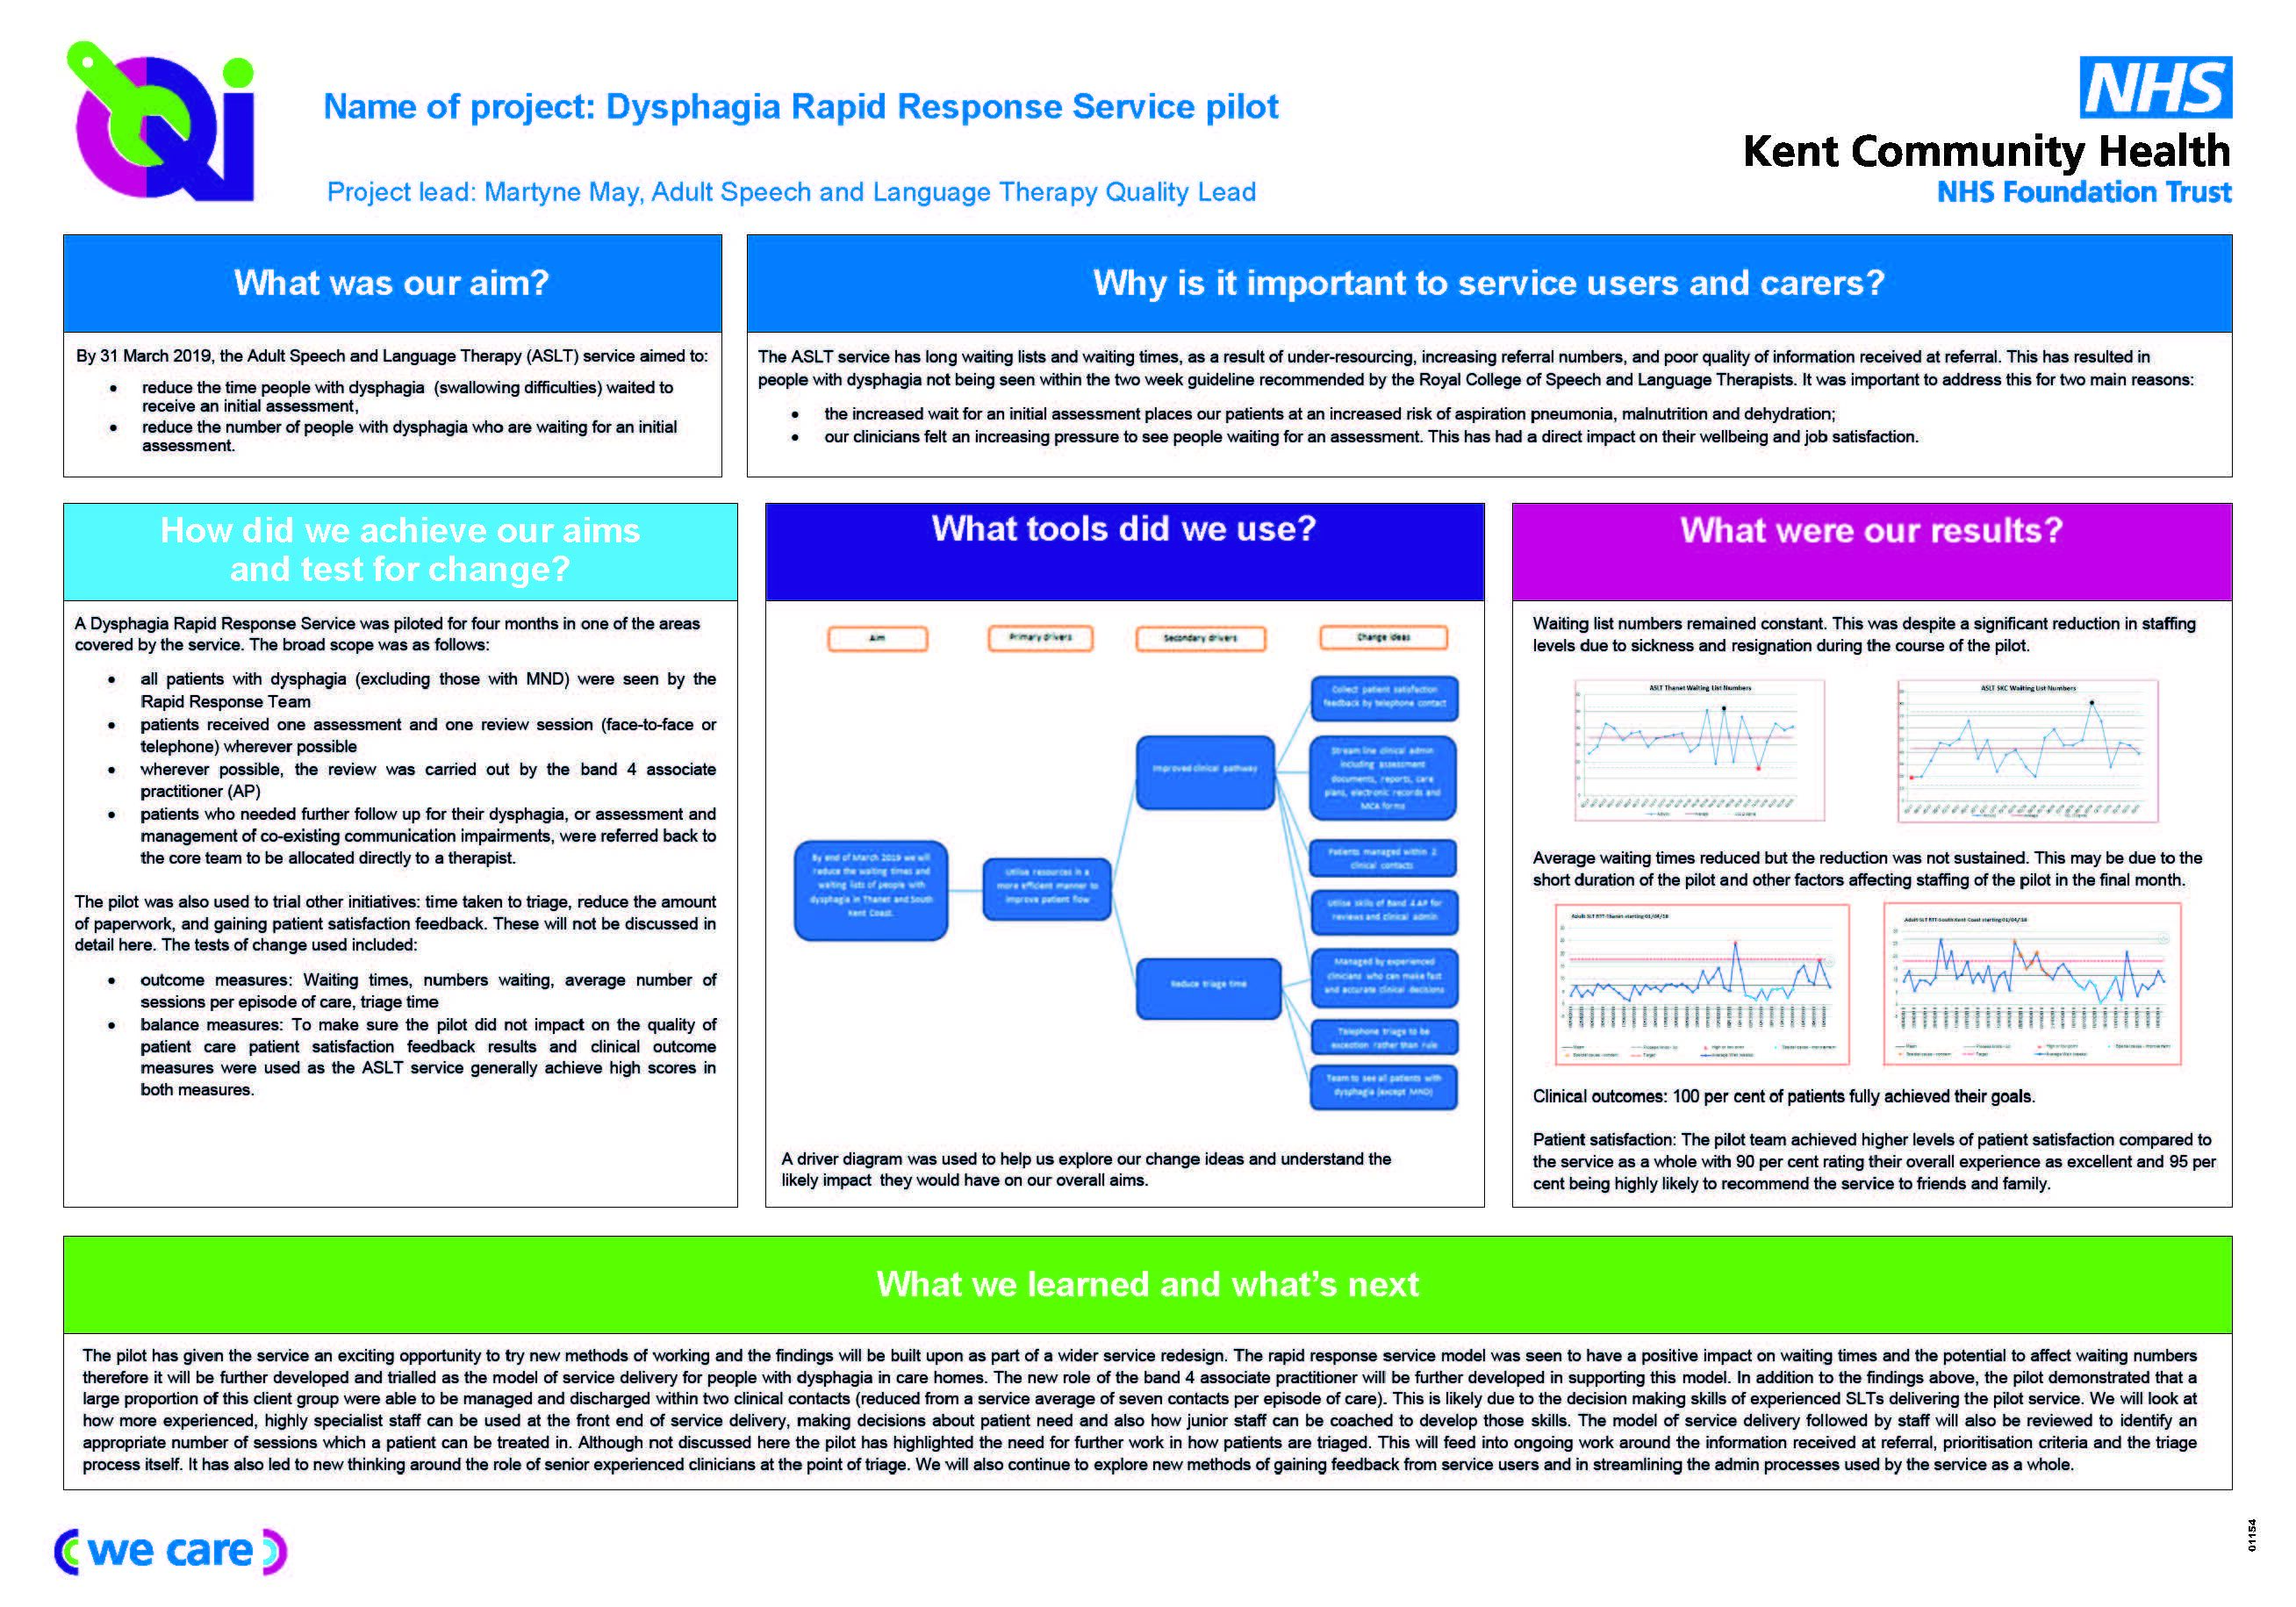 Dysphagia Rapid Response Service pilot project on a page